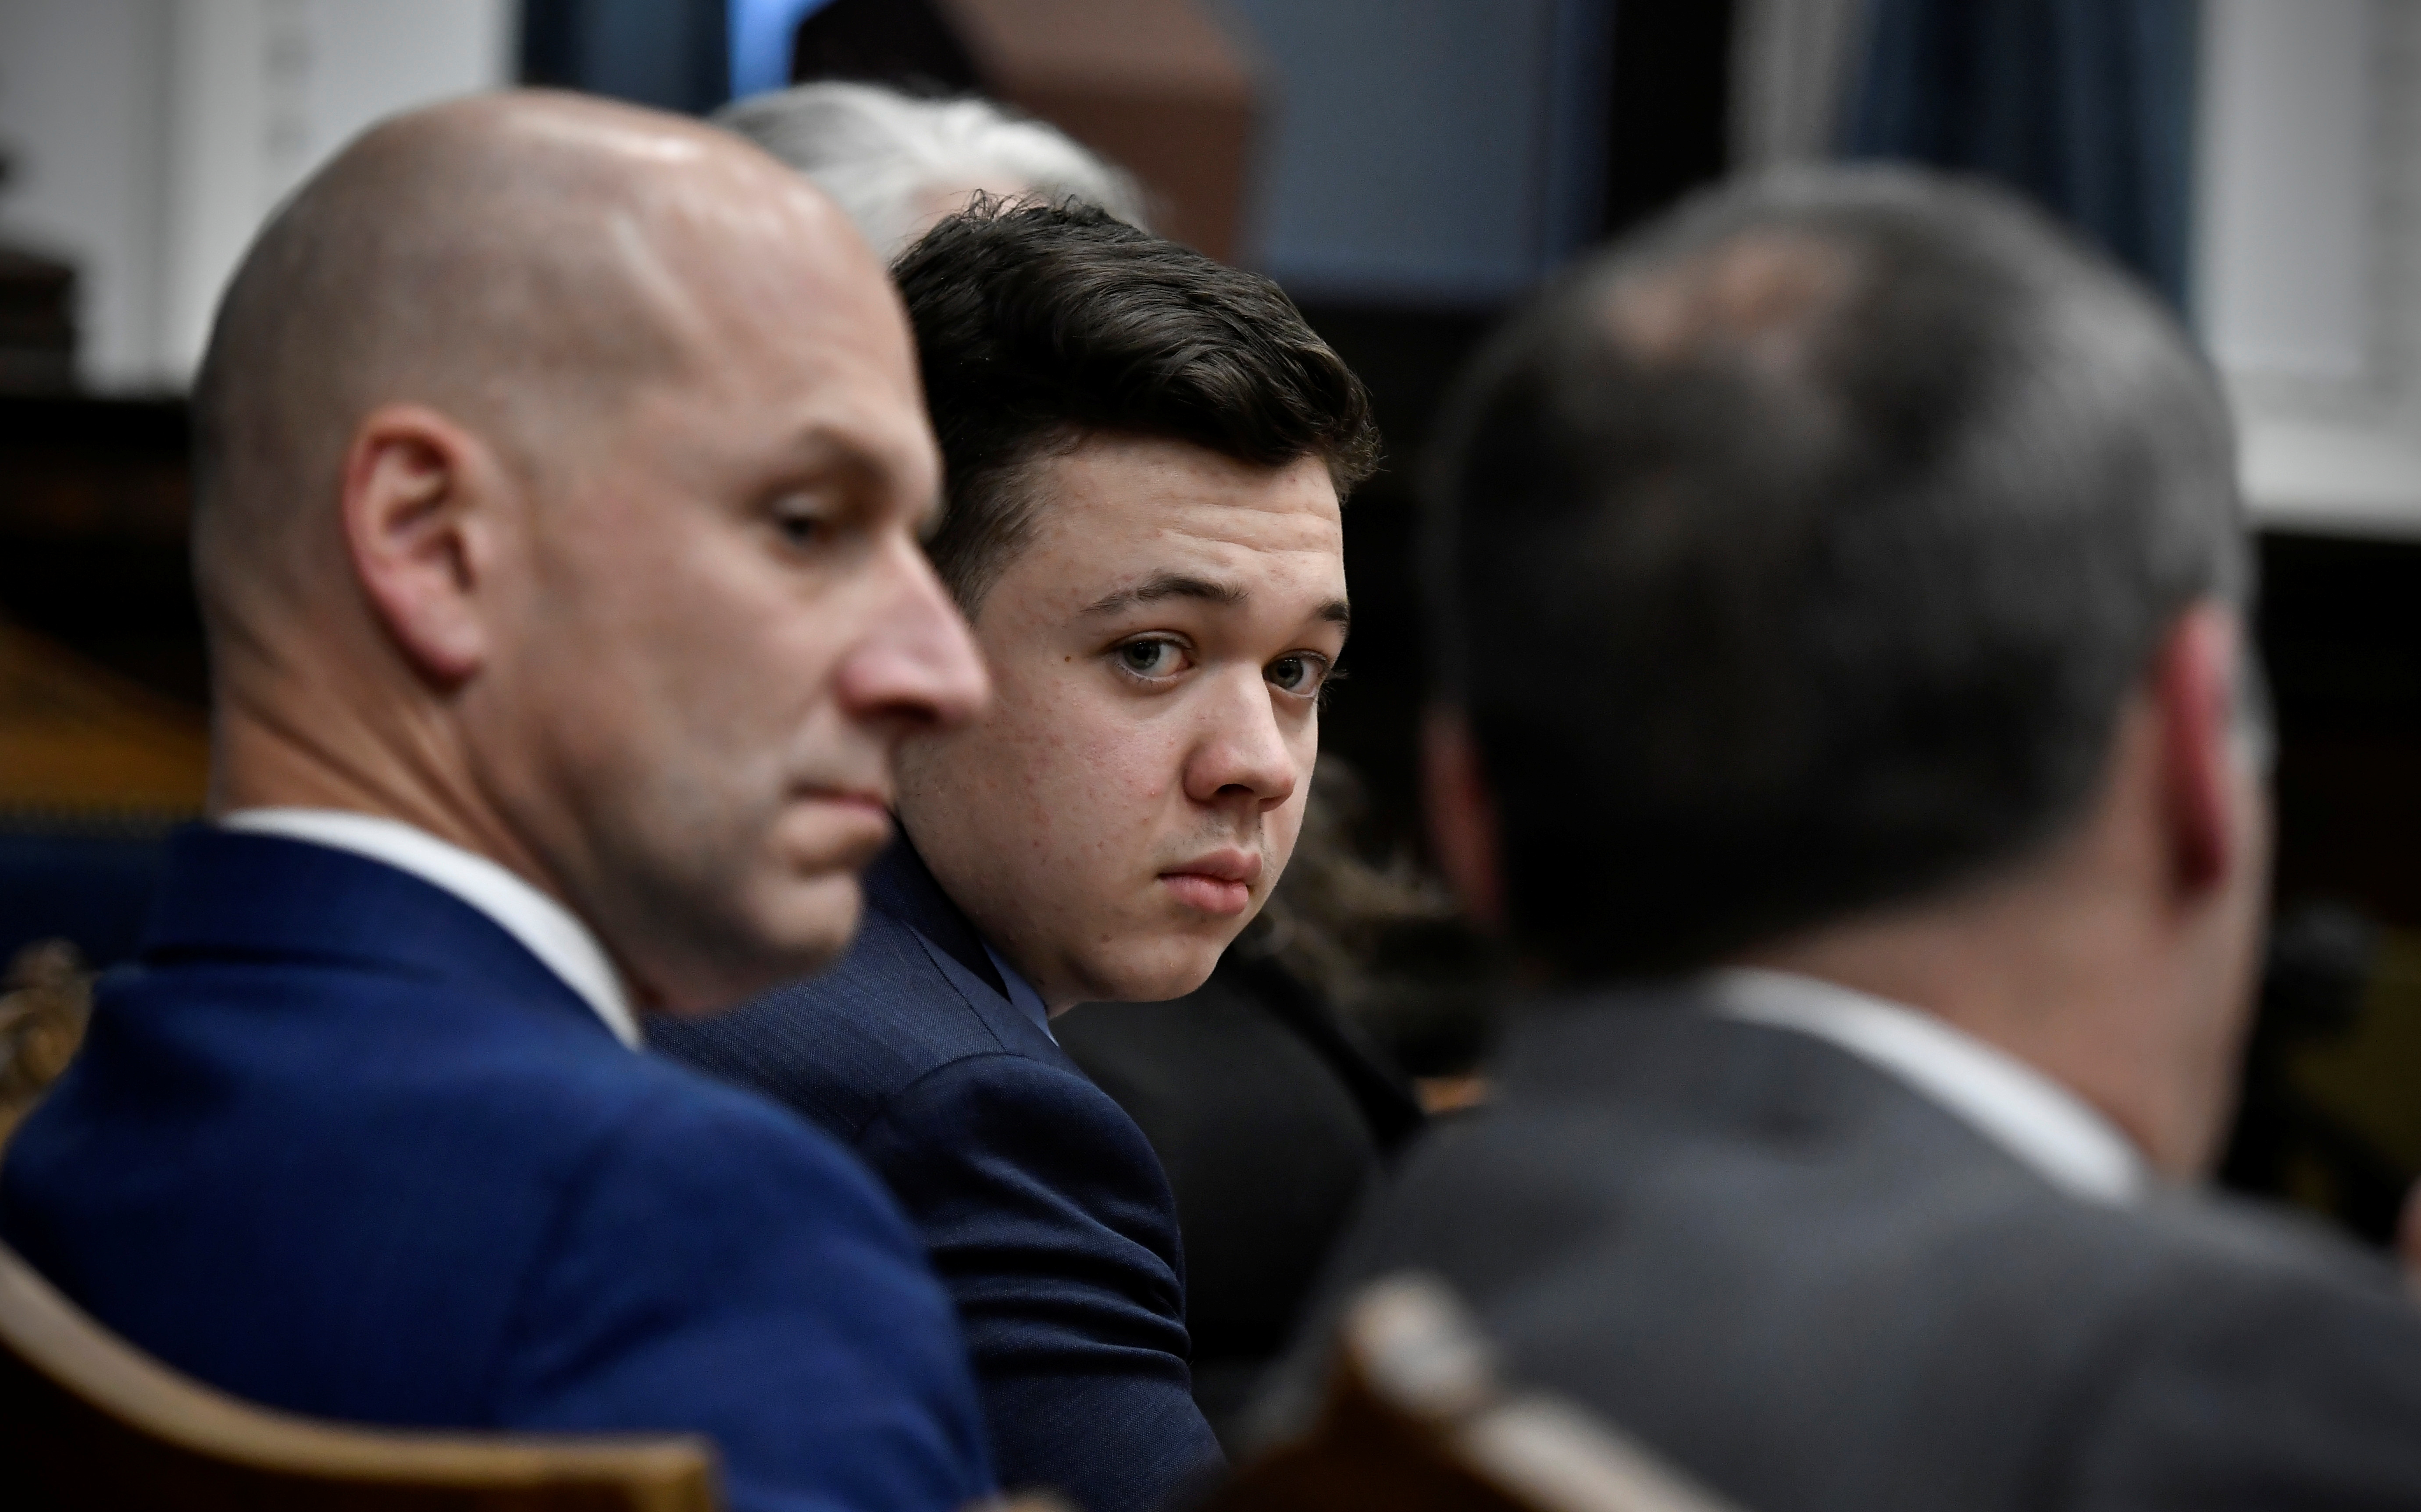 Kyle Rittenhouse looks over to his attorneys as the jury is dismissed for the day during his trial at the Kenosha County Courthouse in Kenosha, U.S., November 18, 2021. Sean Krajacic/Pool via REUTERS